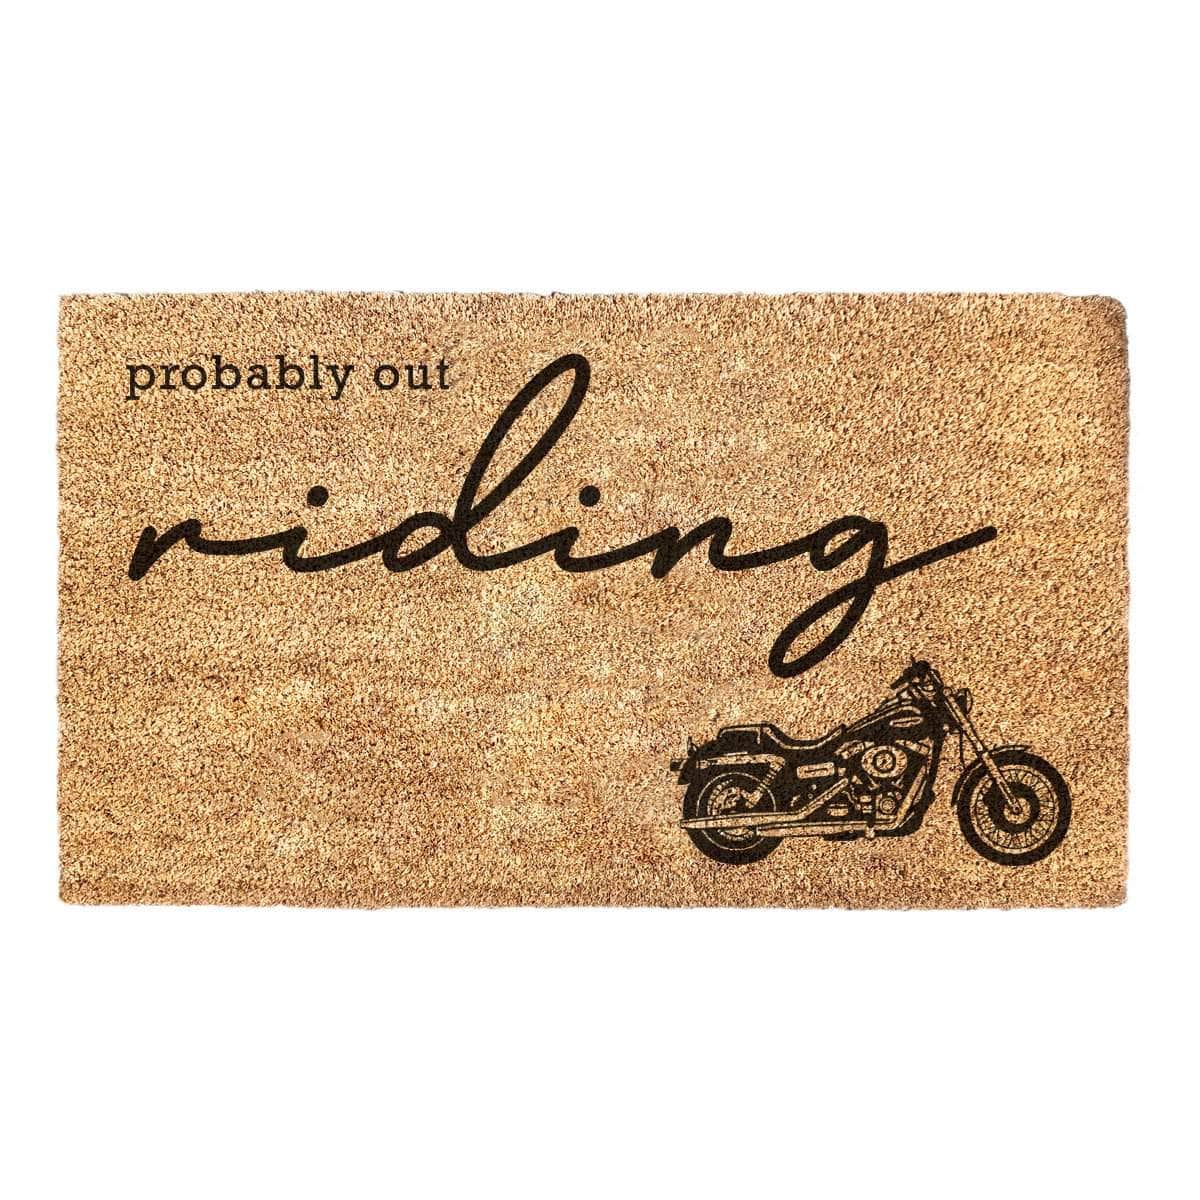 Probably Out Riding - Doormat